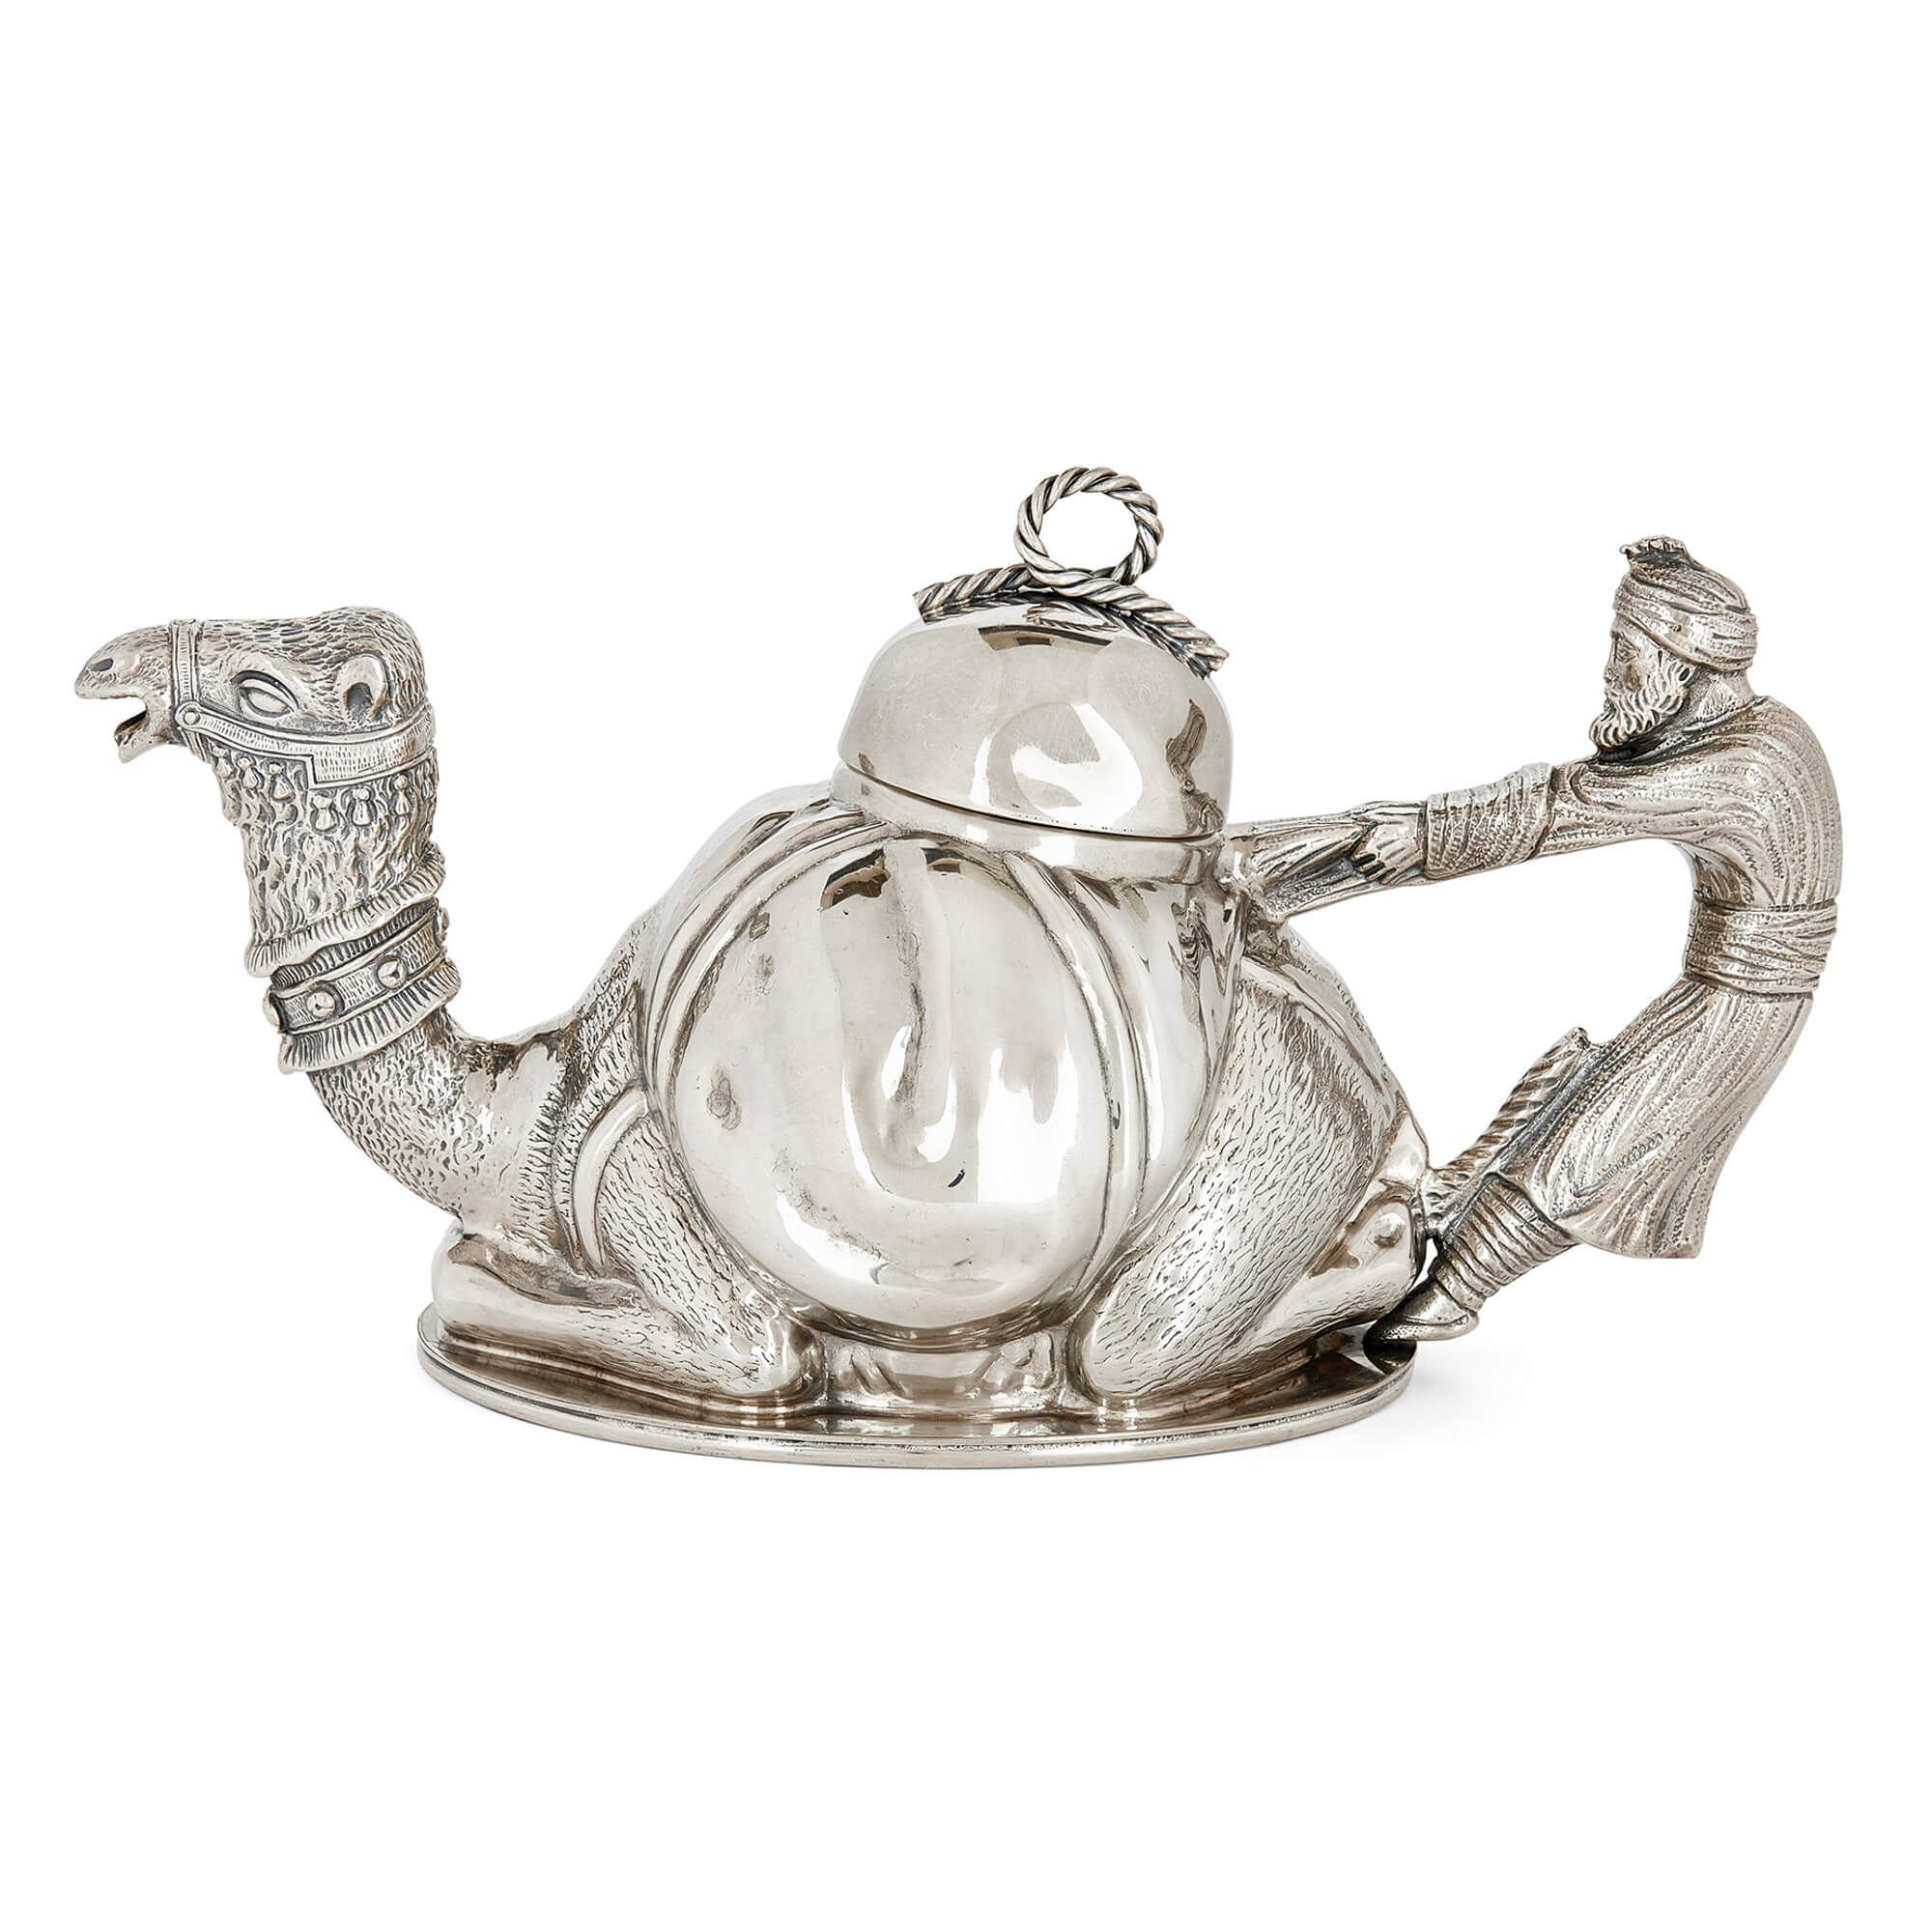 Camel Form Karawan Silver-Plated Teapot by Mariage Freres Paris France